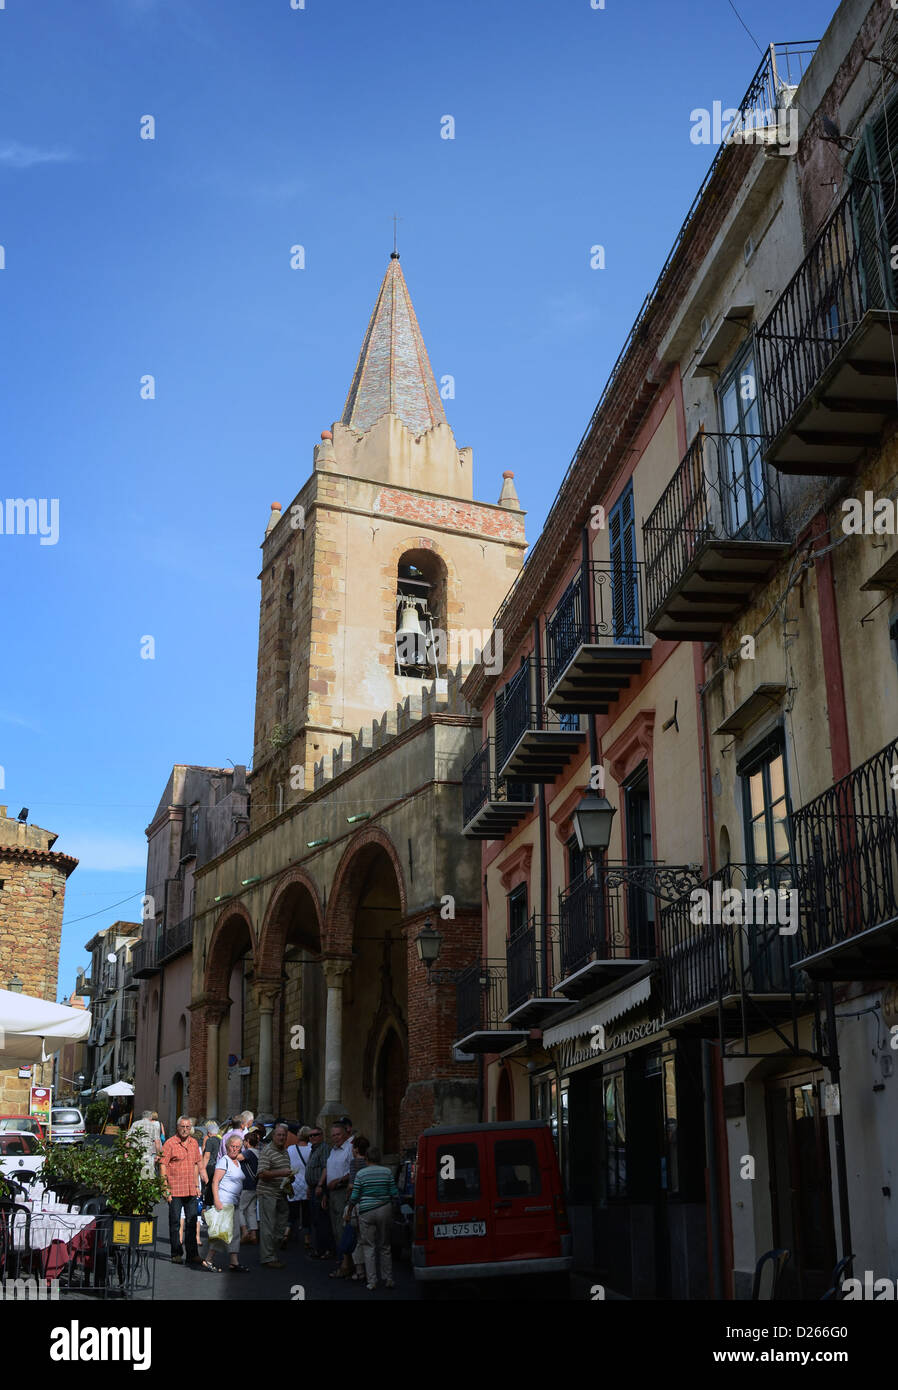 Street scenes in Castelbuono Sicily high in mountains in centre of island Stock Photo